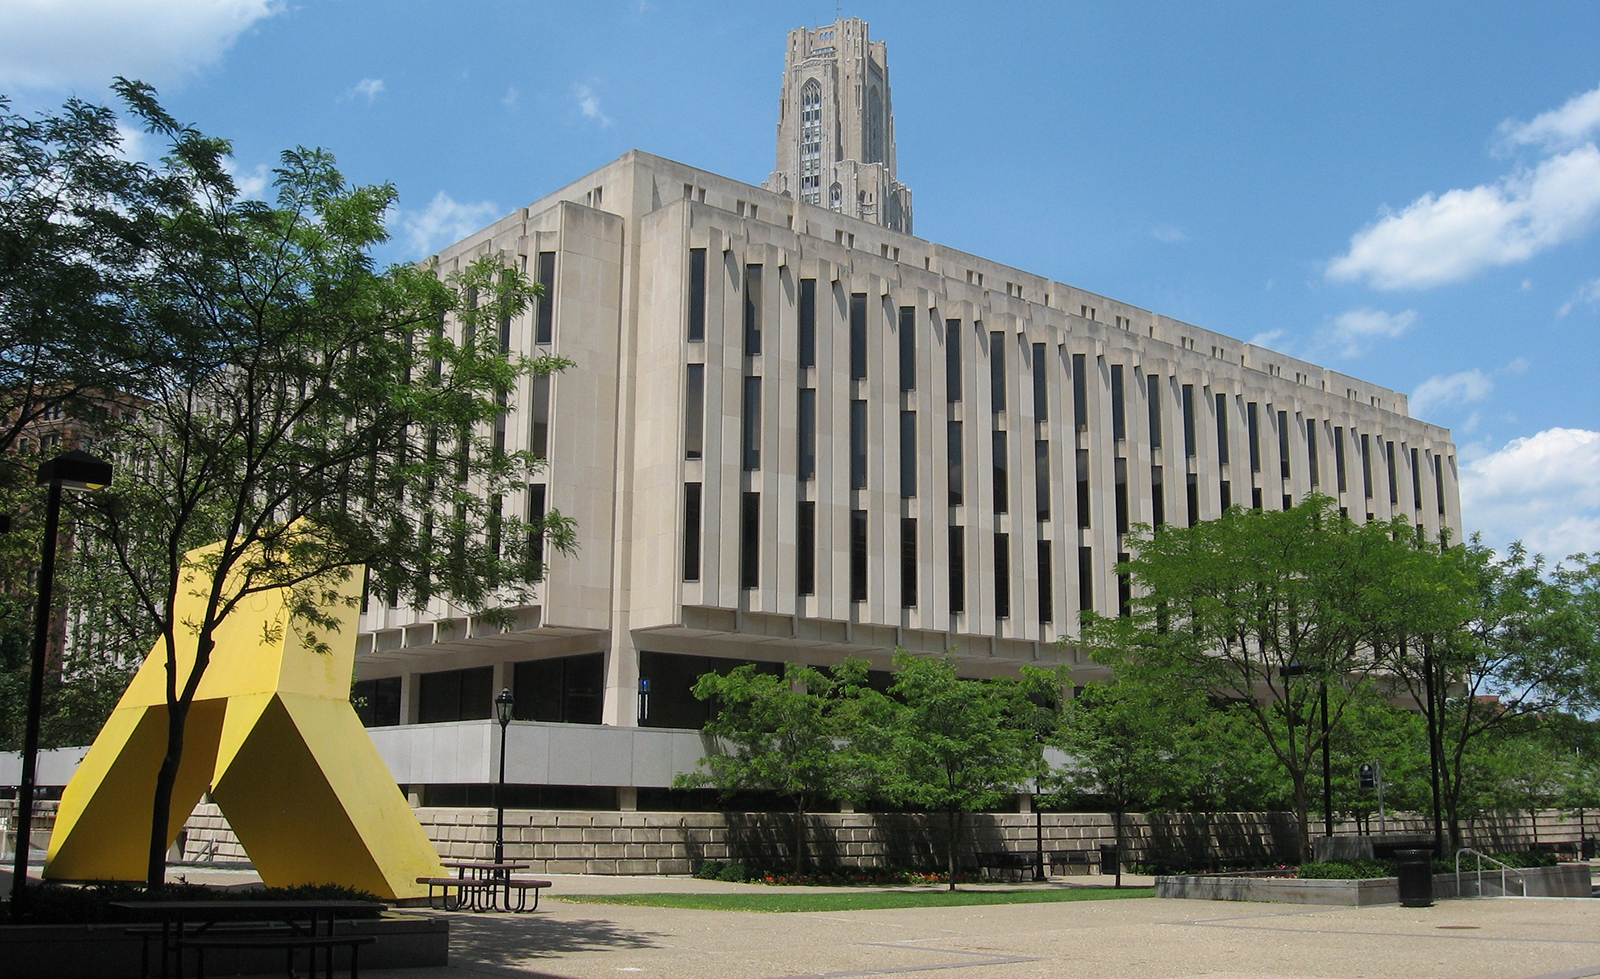 University of Pittsburgh's Hillman Library exterior; a large sculpture to the left.